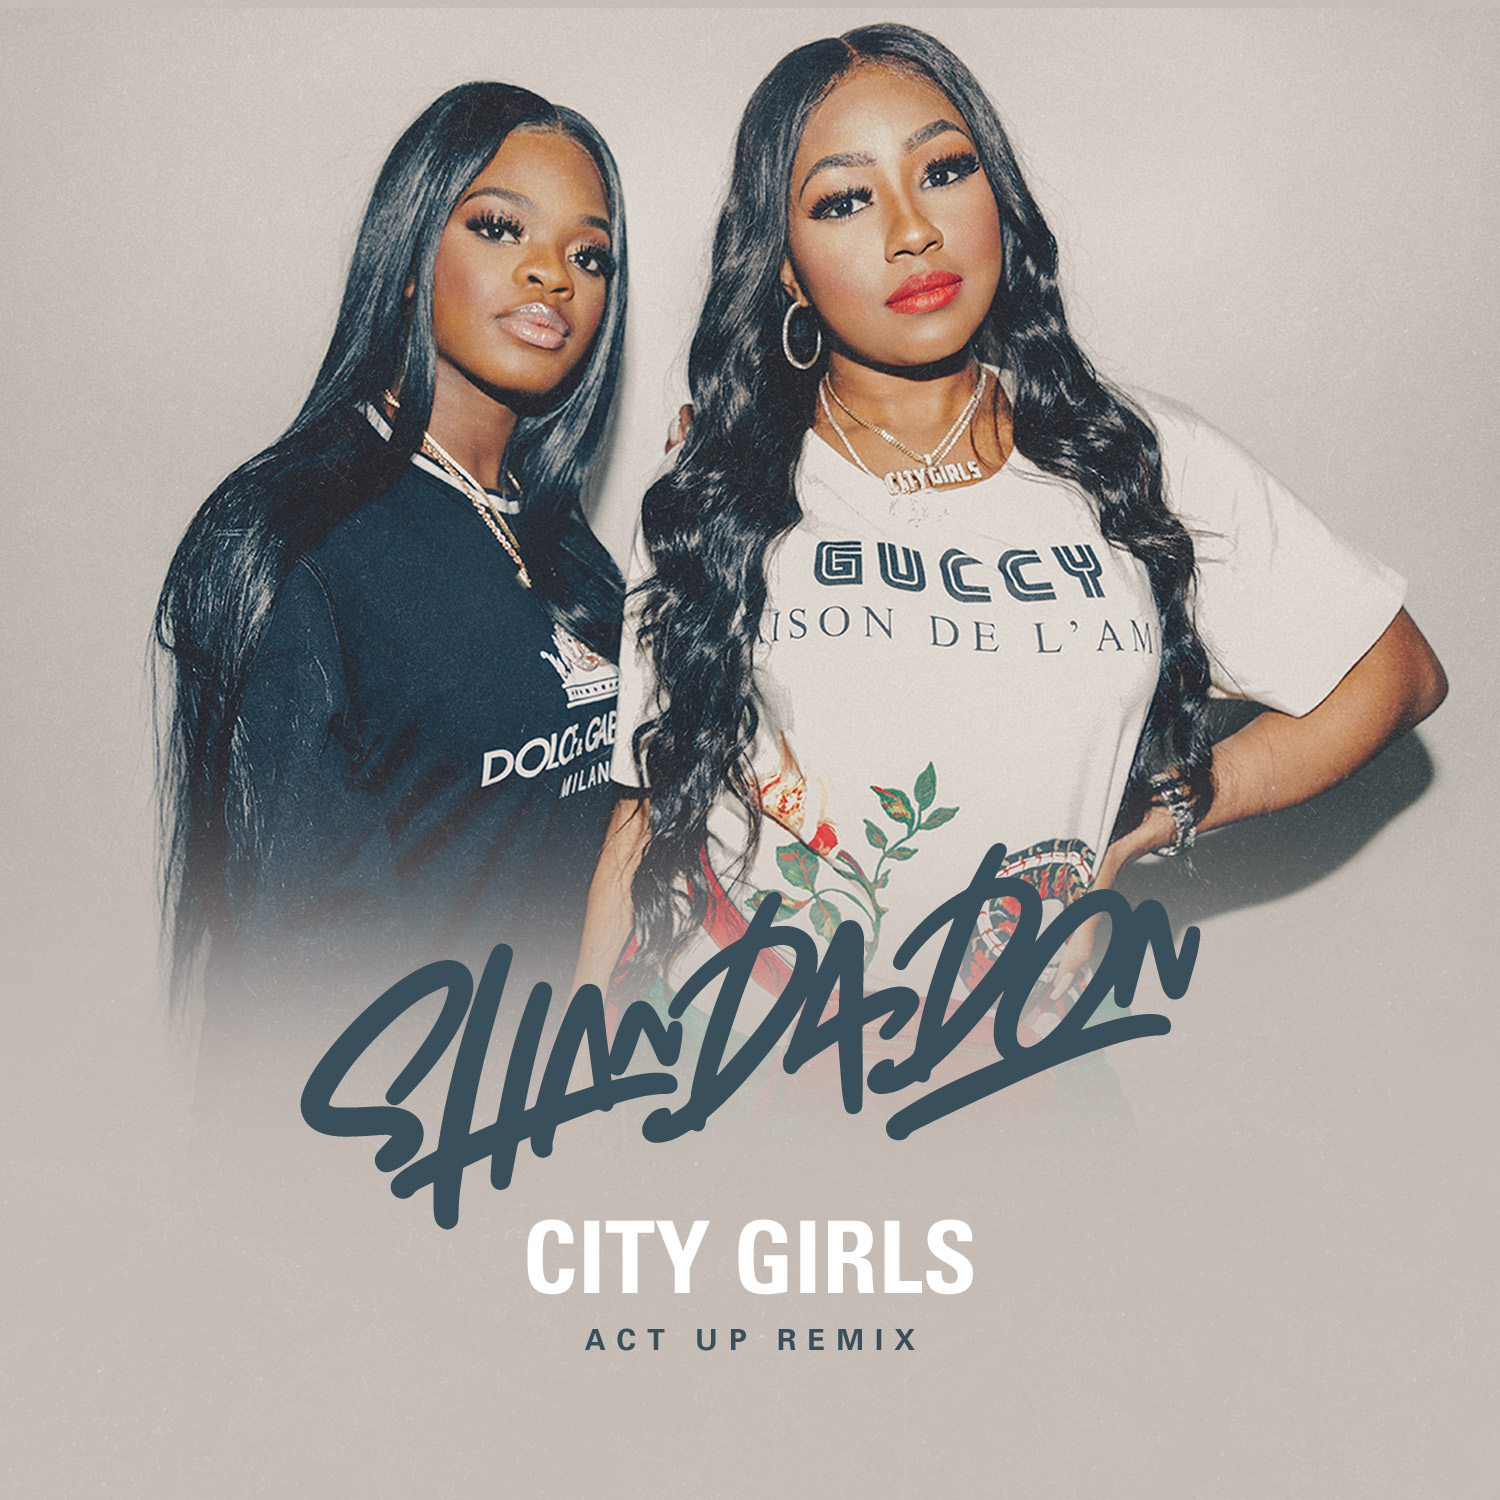 Act up city girls download